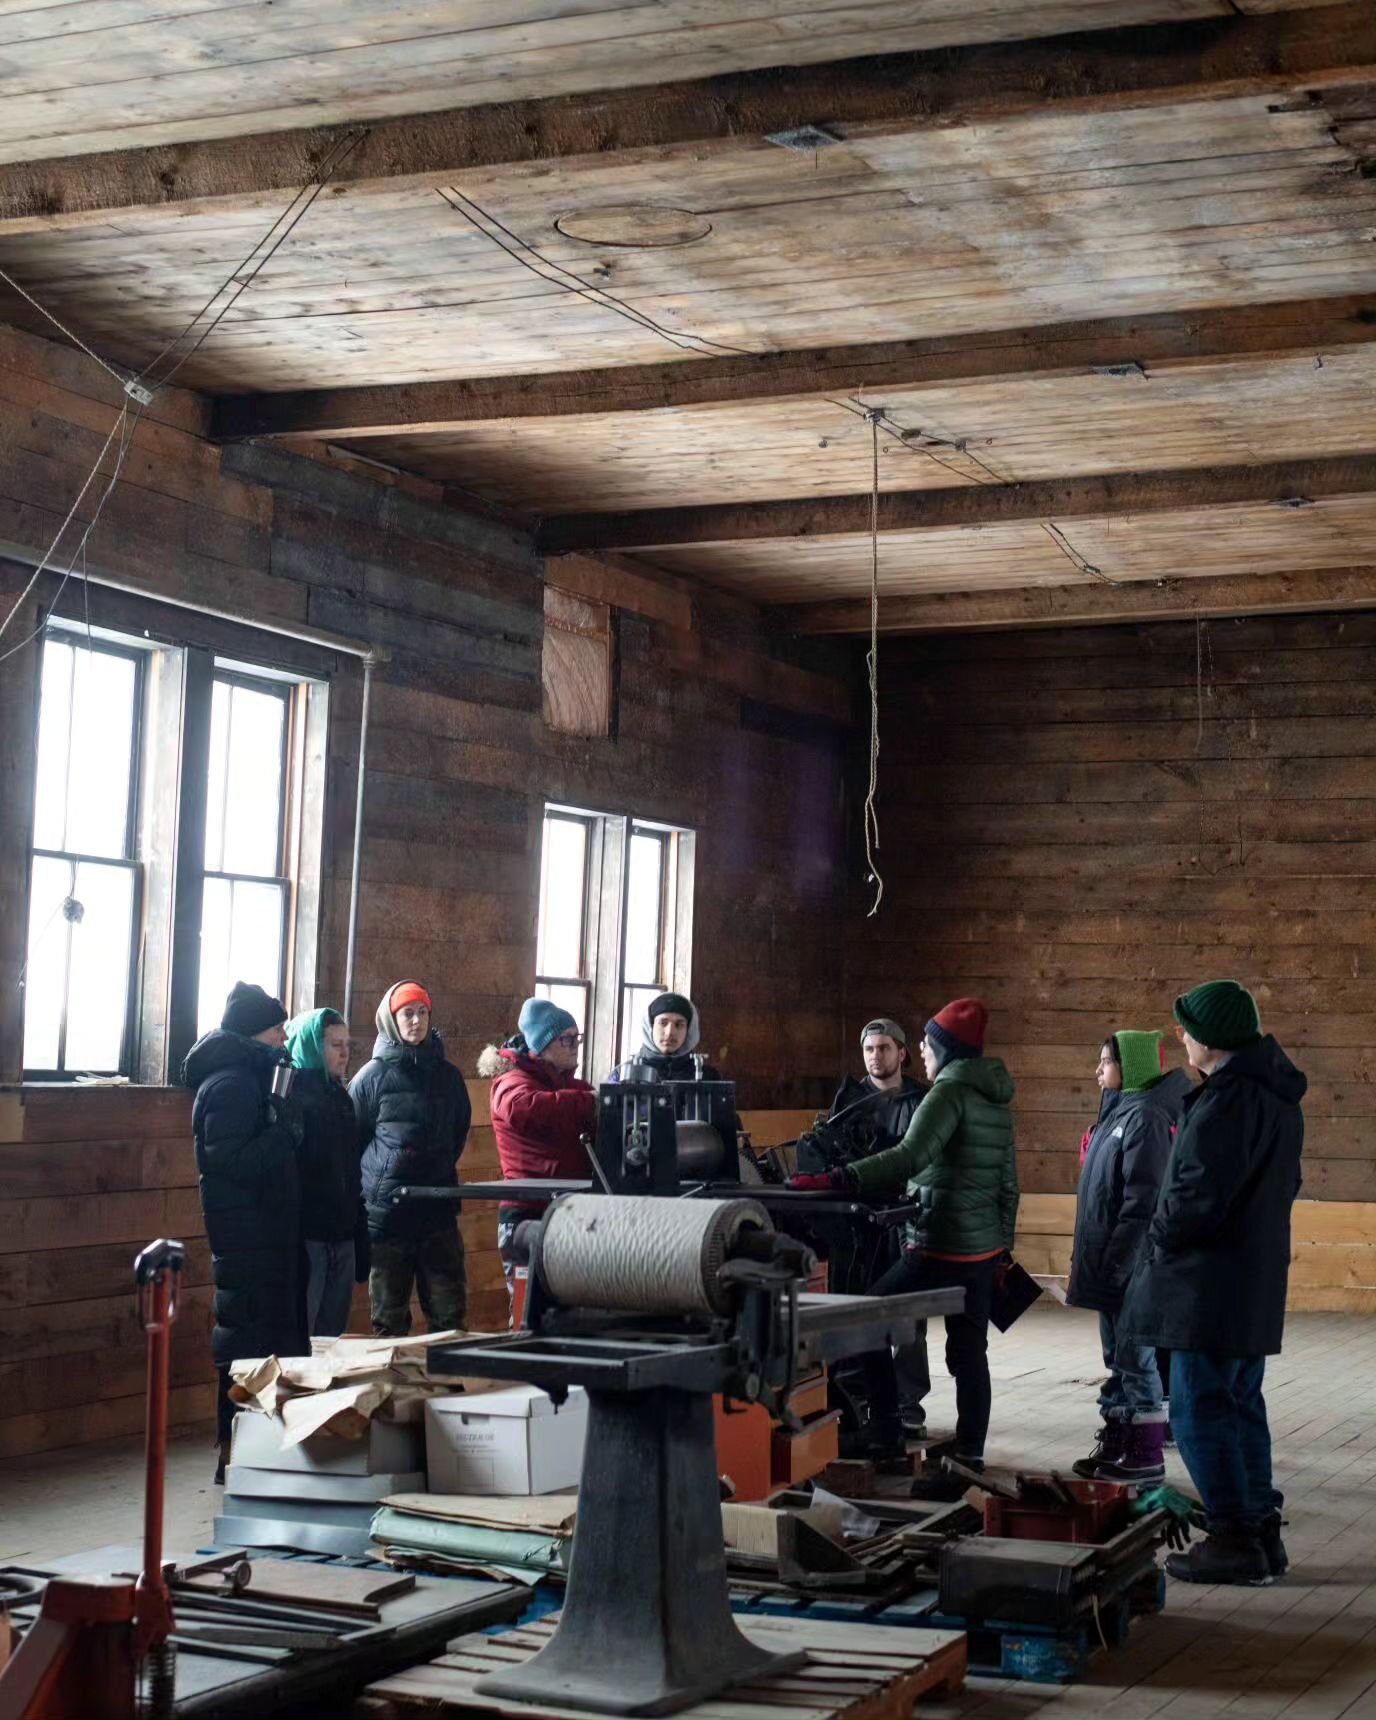 Yesterday's warmer weather called for a field trip to the Dawson Daily News to learn a bit about the history of print and publishing in the Klondike. 📰 
Built in 1901, the DDN is one of Dawson's many historic buildings, and at the height of the gold